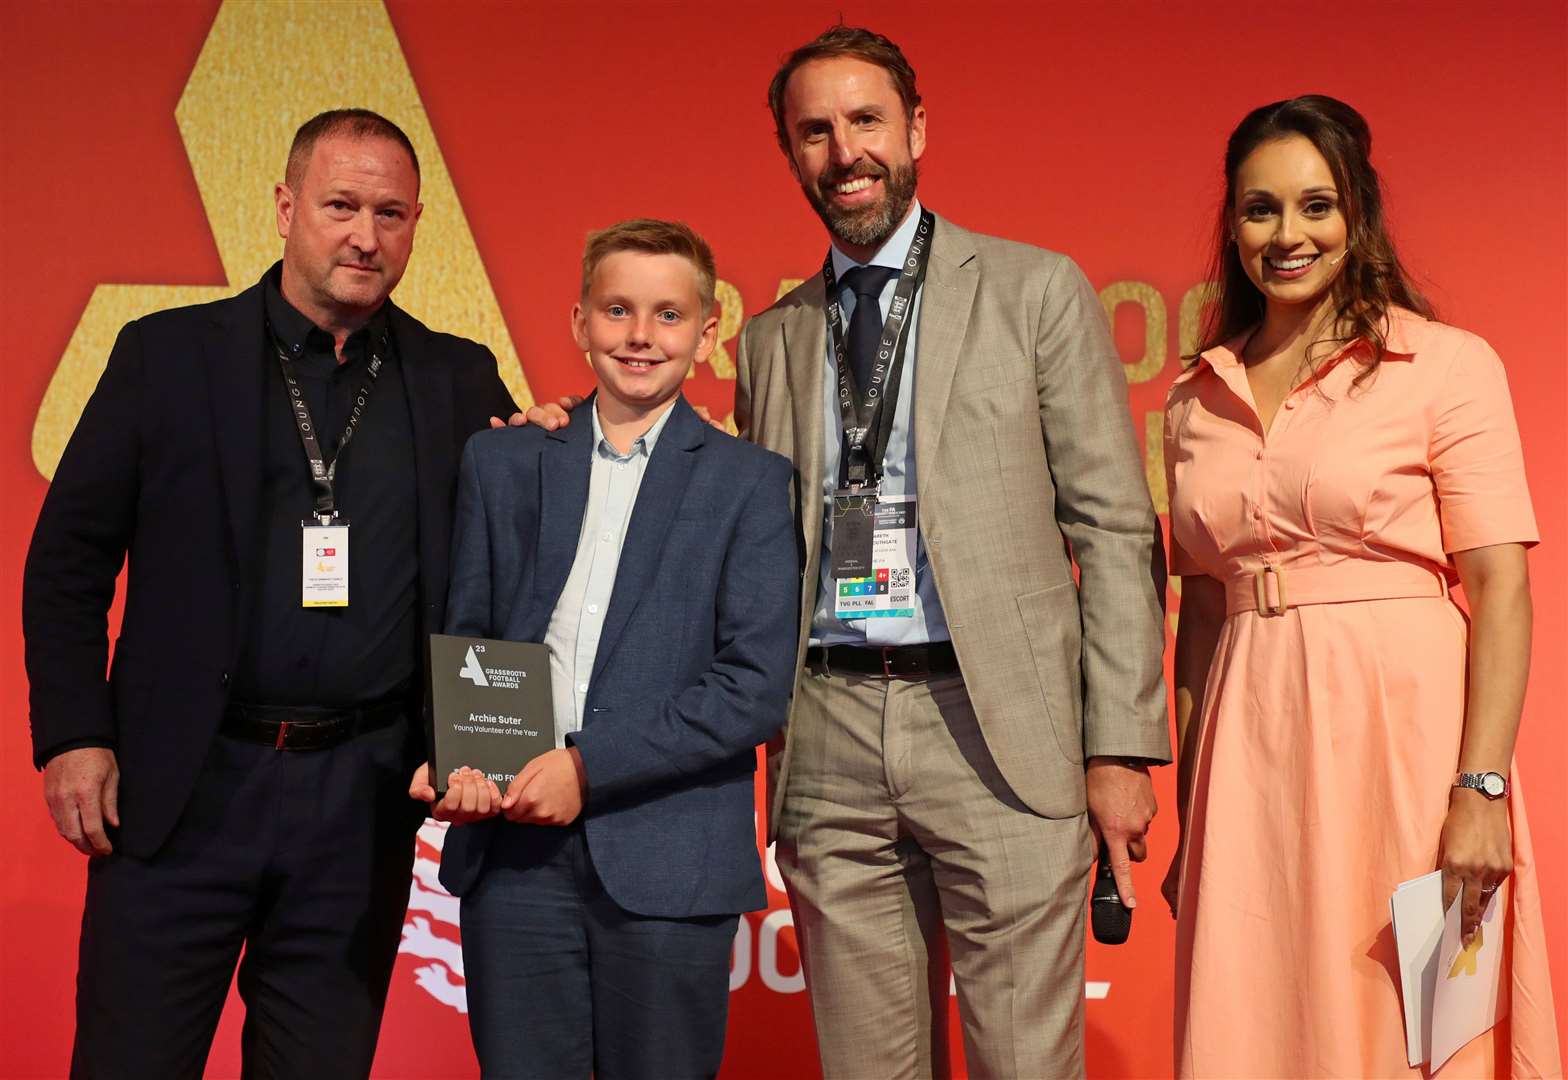 Faversham Strike Force's Archie Suter, winner of Young Volunteer of the Year, is presented with his award at Wembley by England boss Gareth Southgate. Picture: Henry Browne, The FA/Getty Images